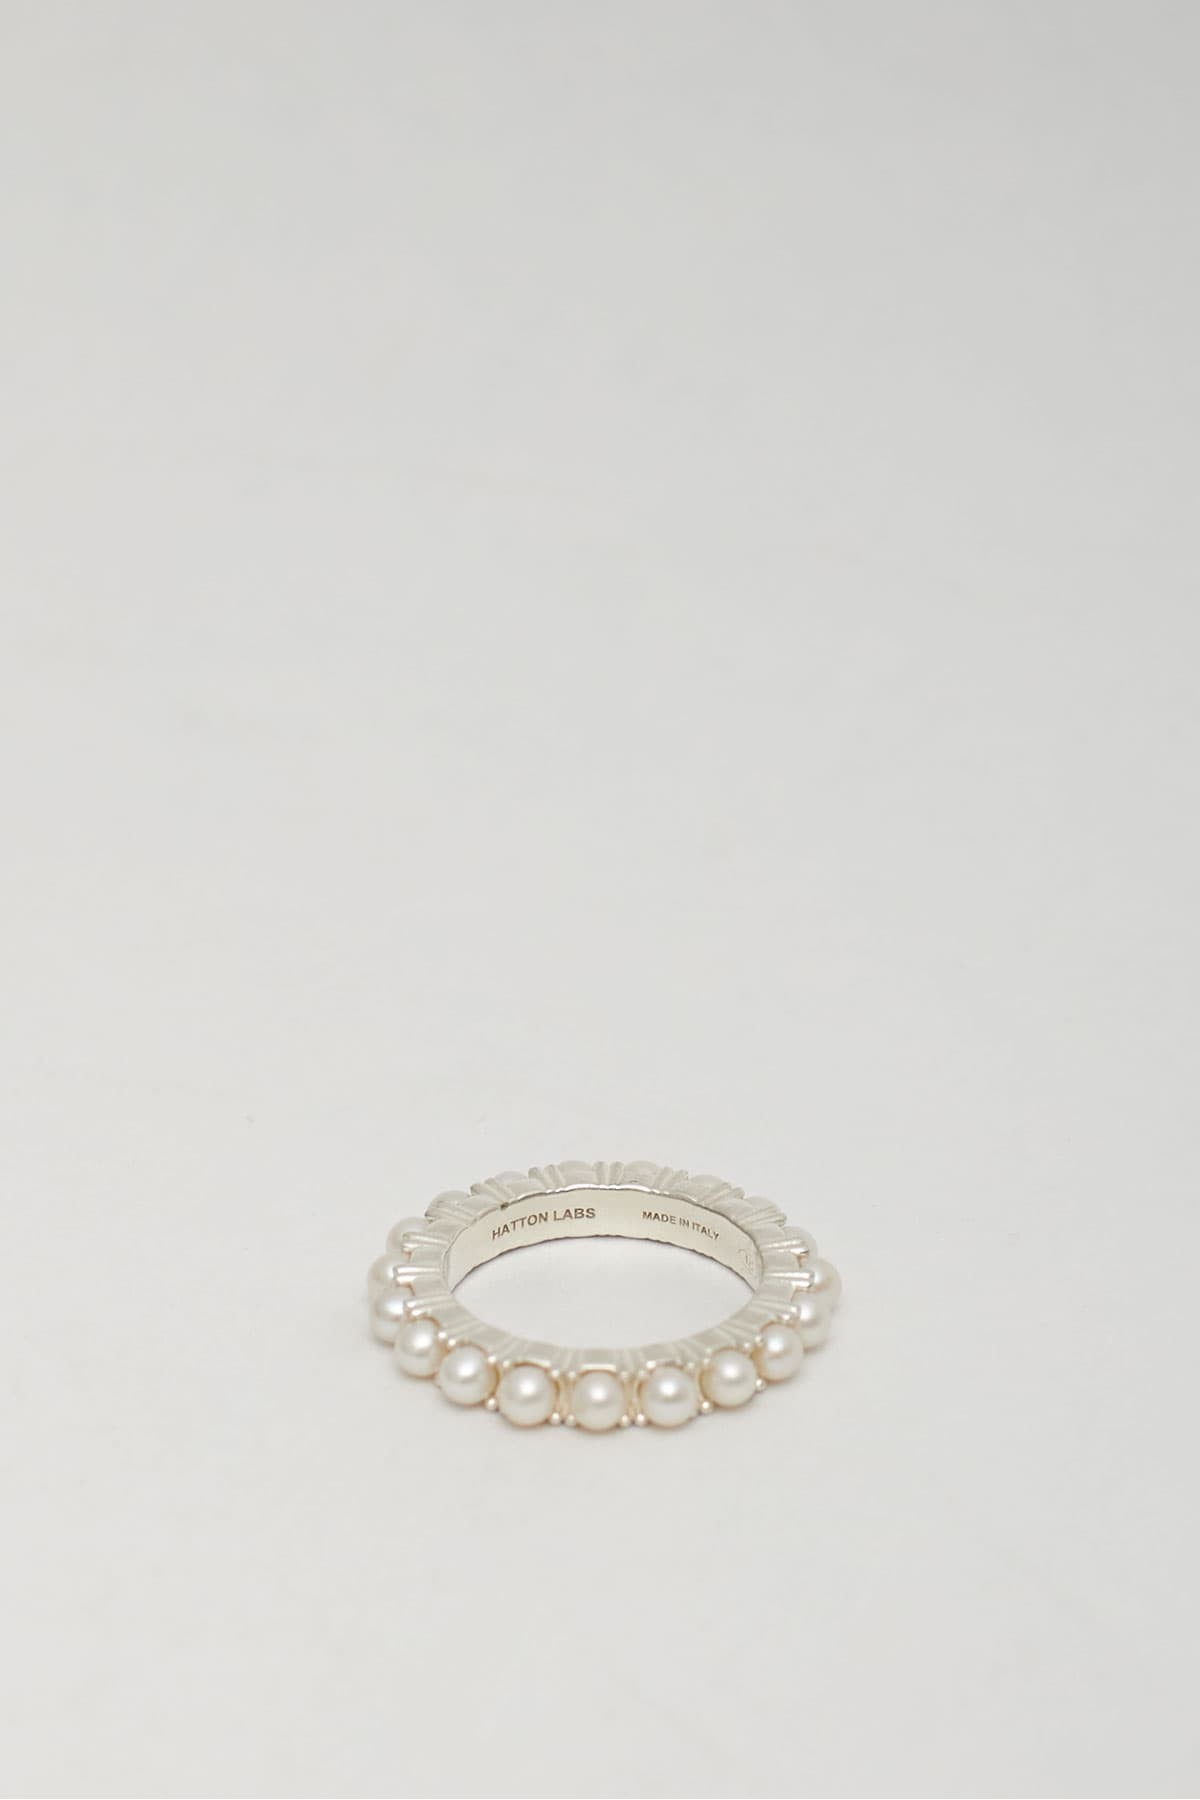 HATTON LABS STERLING SILVER PEARL ETERNITY RING IAMNUE